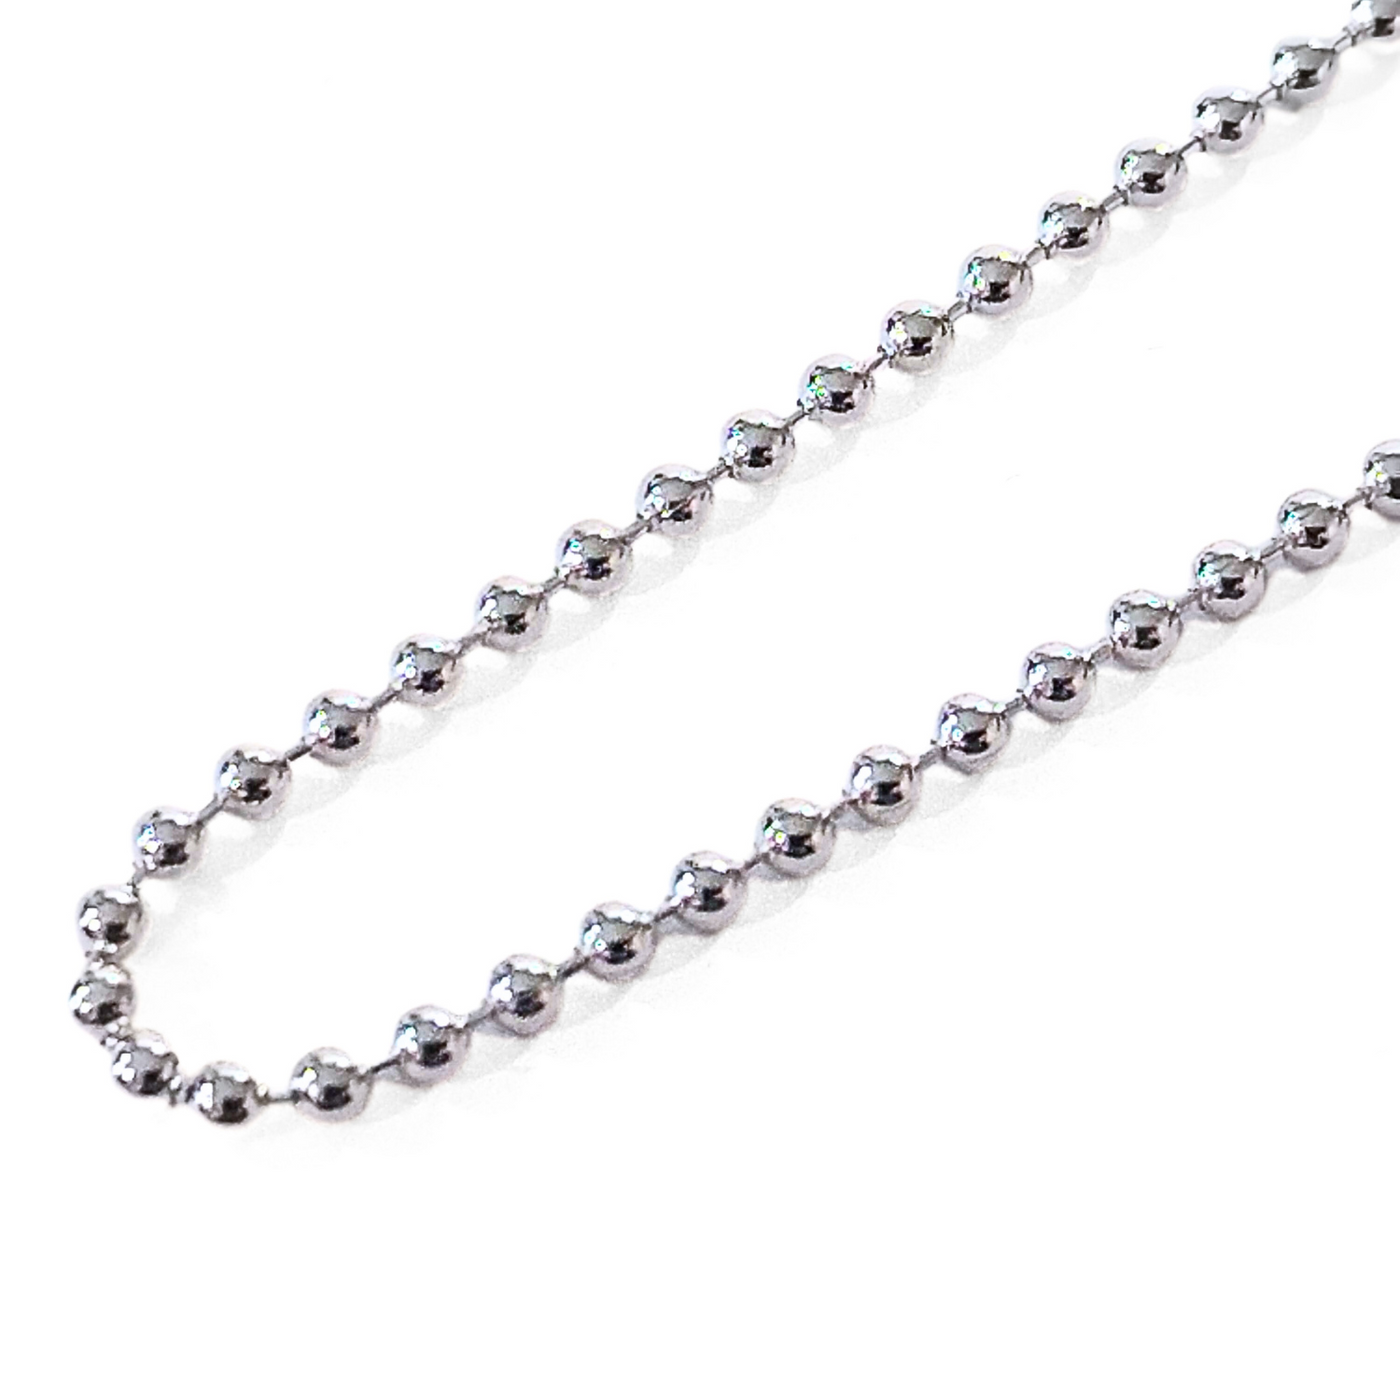 16" 2.0mm Beaded Chain (Sterling Silver)